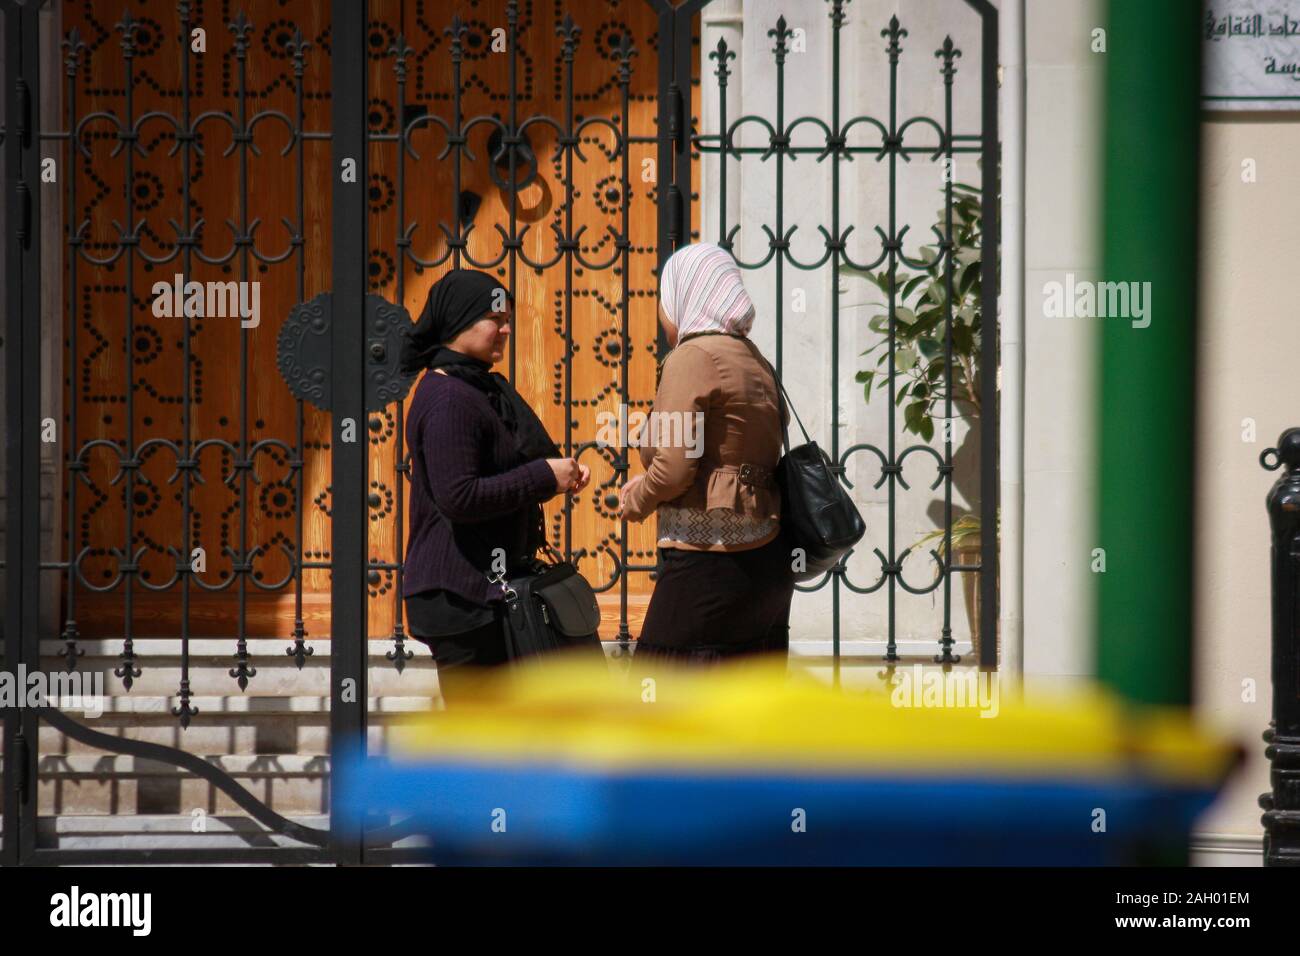 Two Tunisian women with covered hair are having a friendly chat in front of the metal gate in Sousse, Tunisia Stock Photo